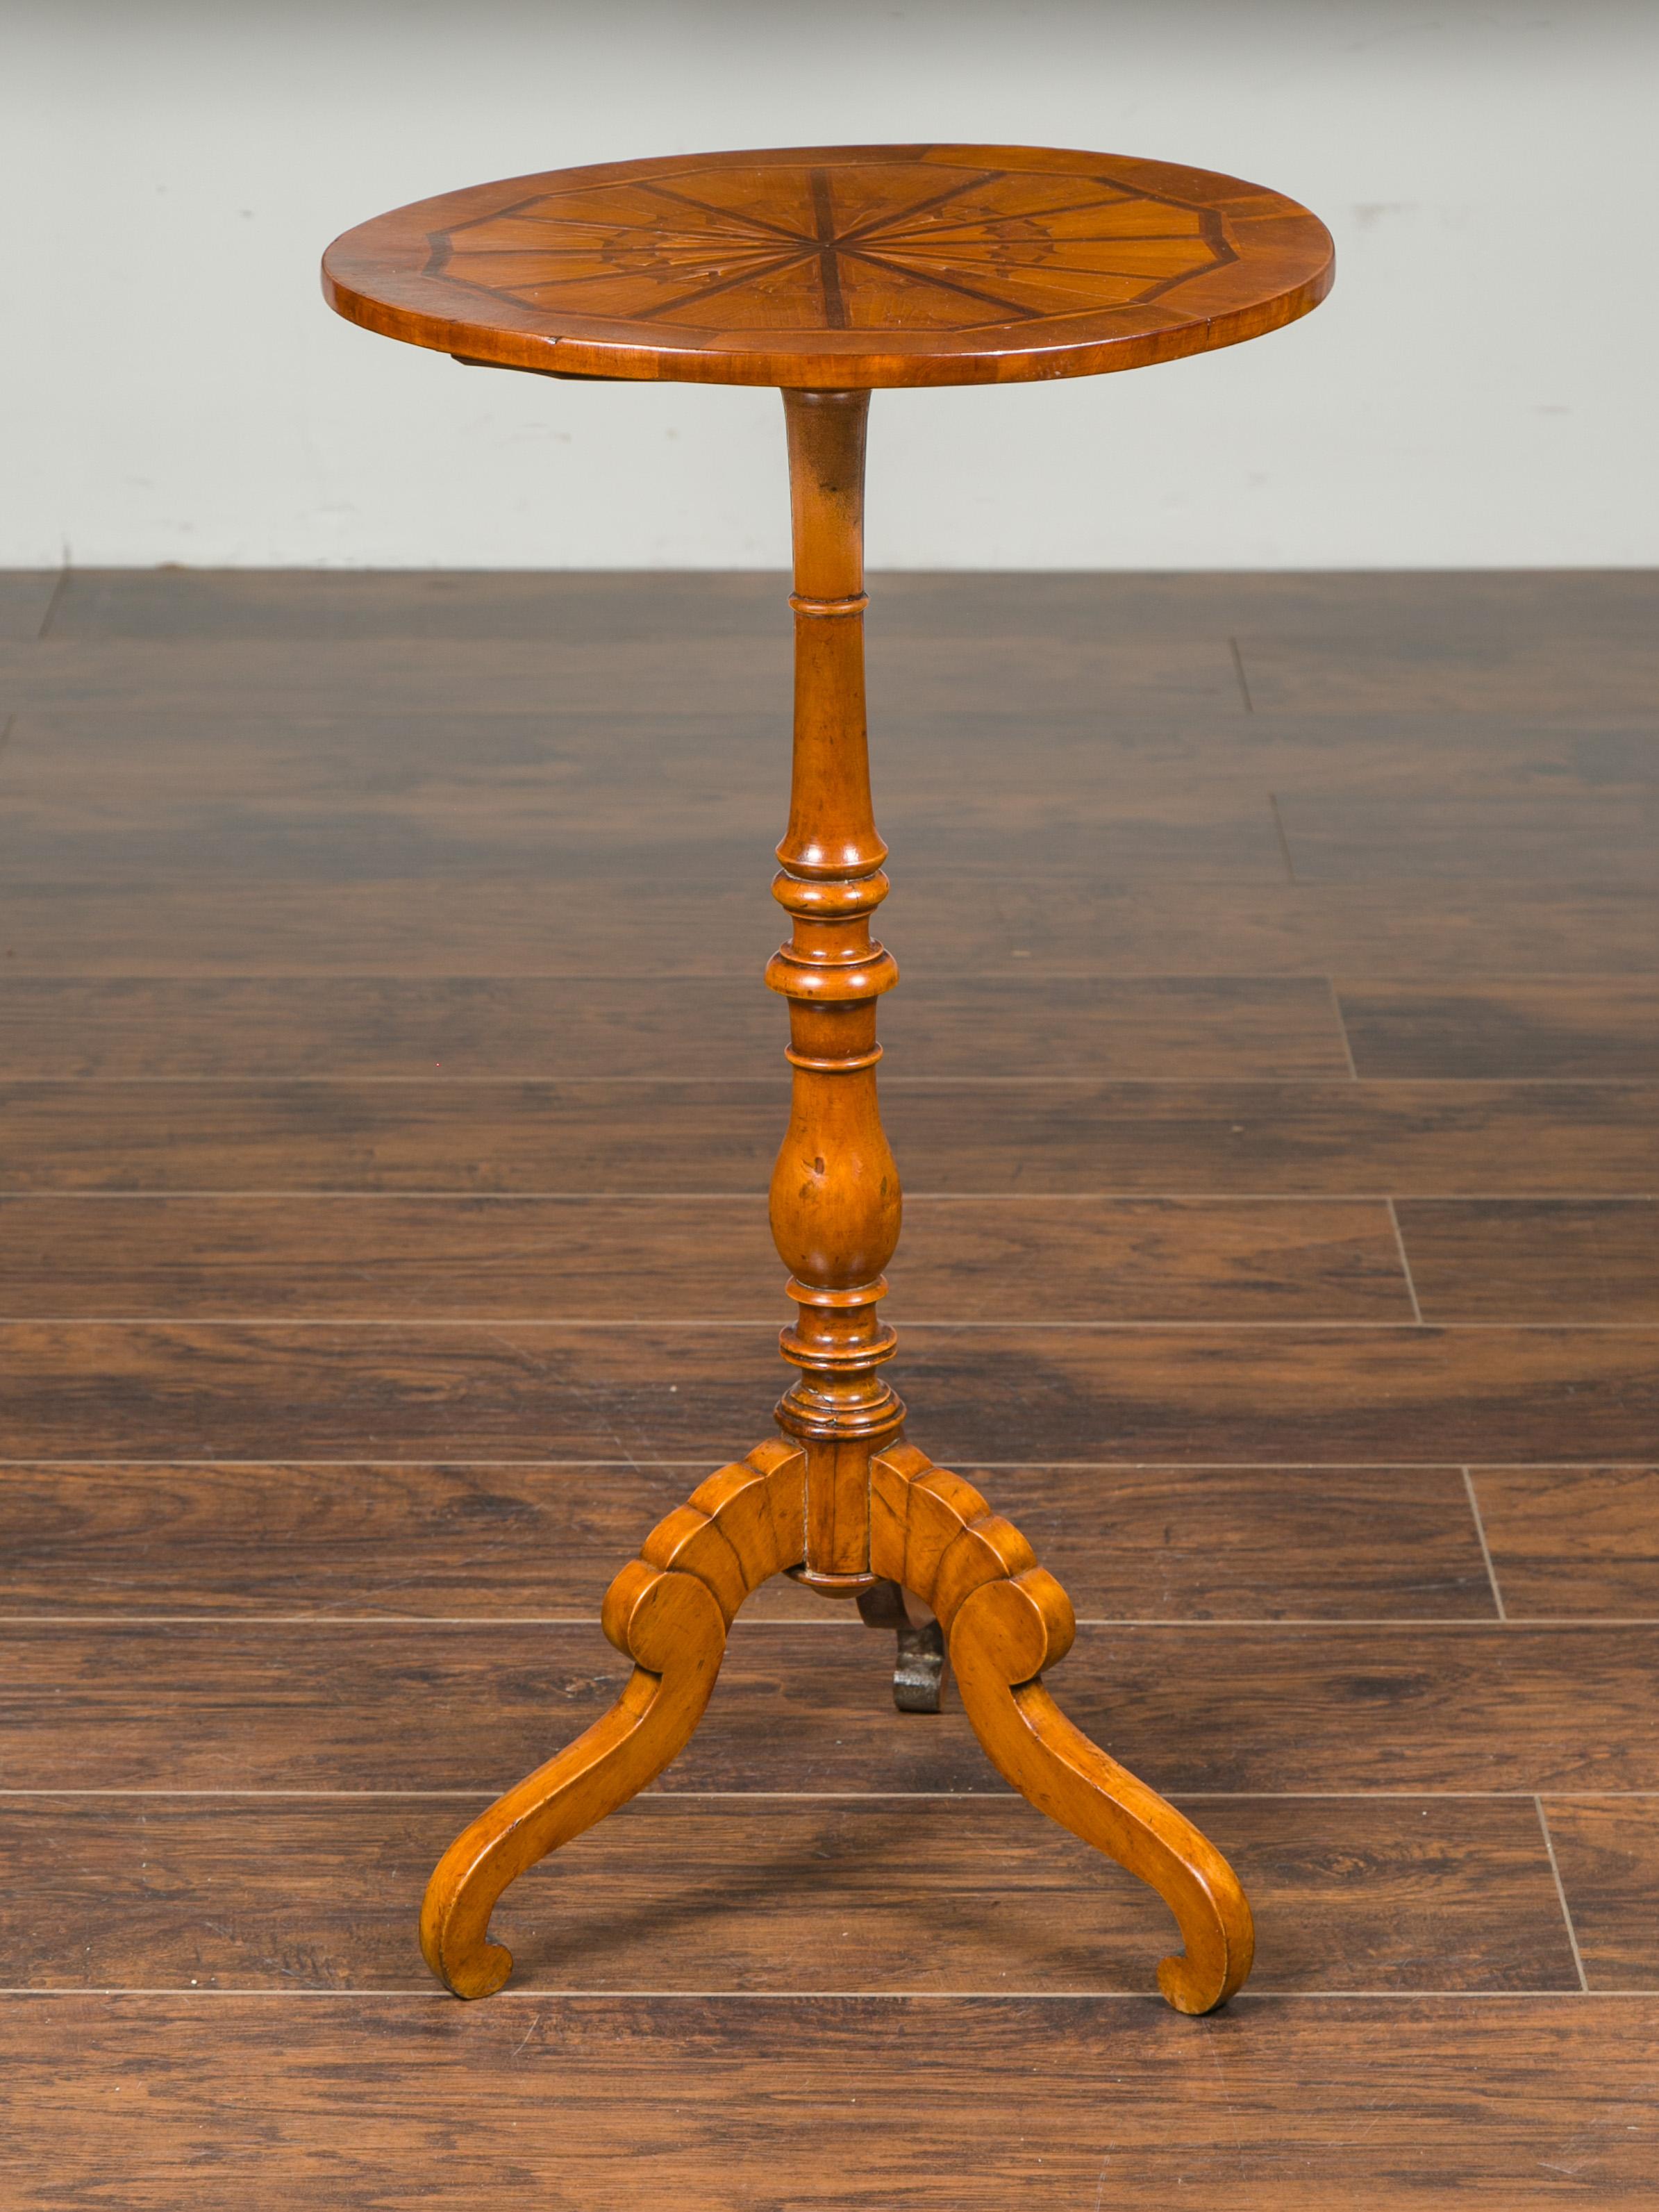 An Italian walnut guéridon side table from the mid-19th century, with marquetry top and tripod base. Created in Italy during the 1850s, this walnut guéridon table features a circular top adorned with delicate stars in marquetry, resting above a